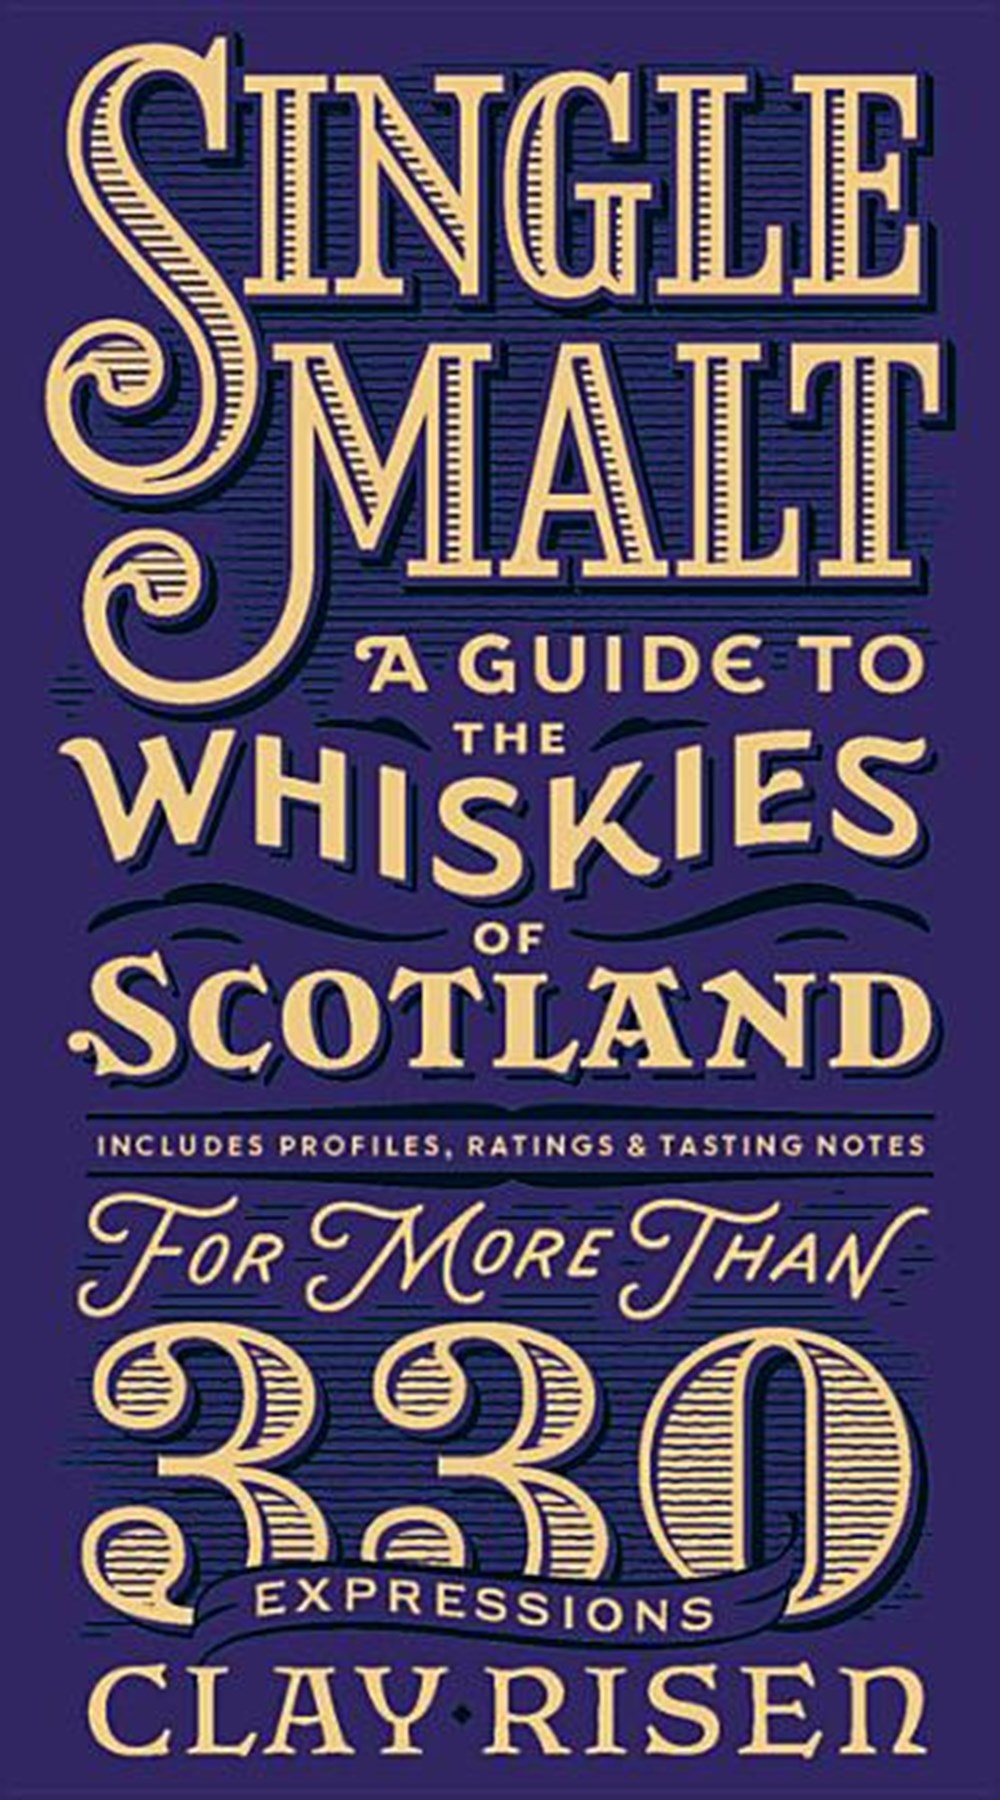 Single Malt: A Guide to the Whiskies of Scotland: Includes Profiles, Ratings, and Tasting Notes for 